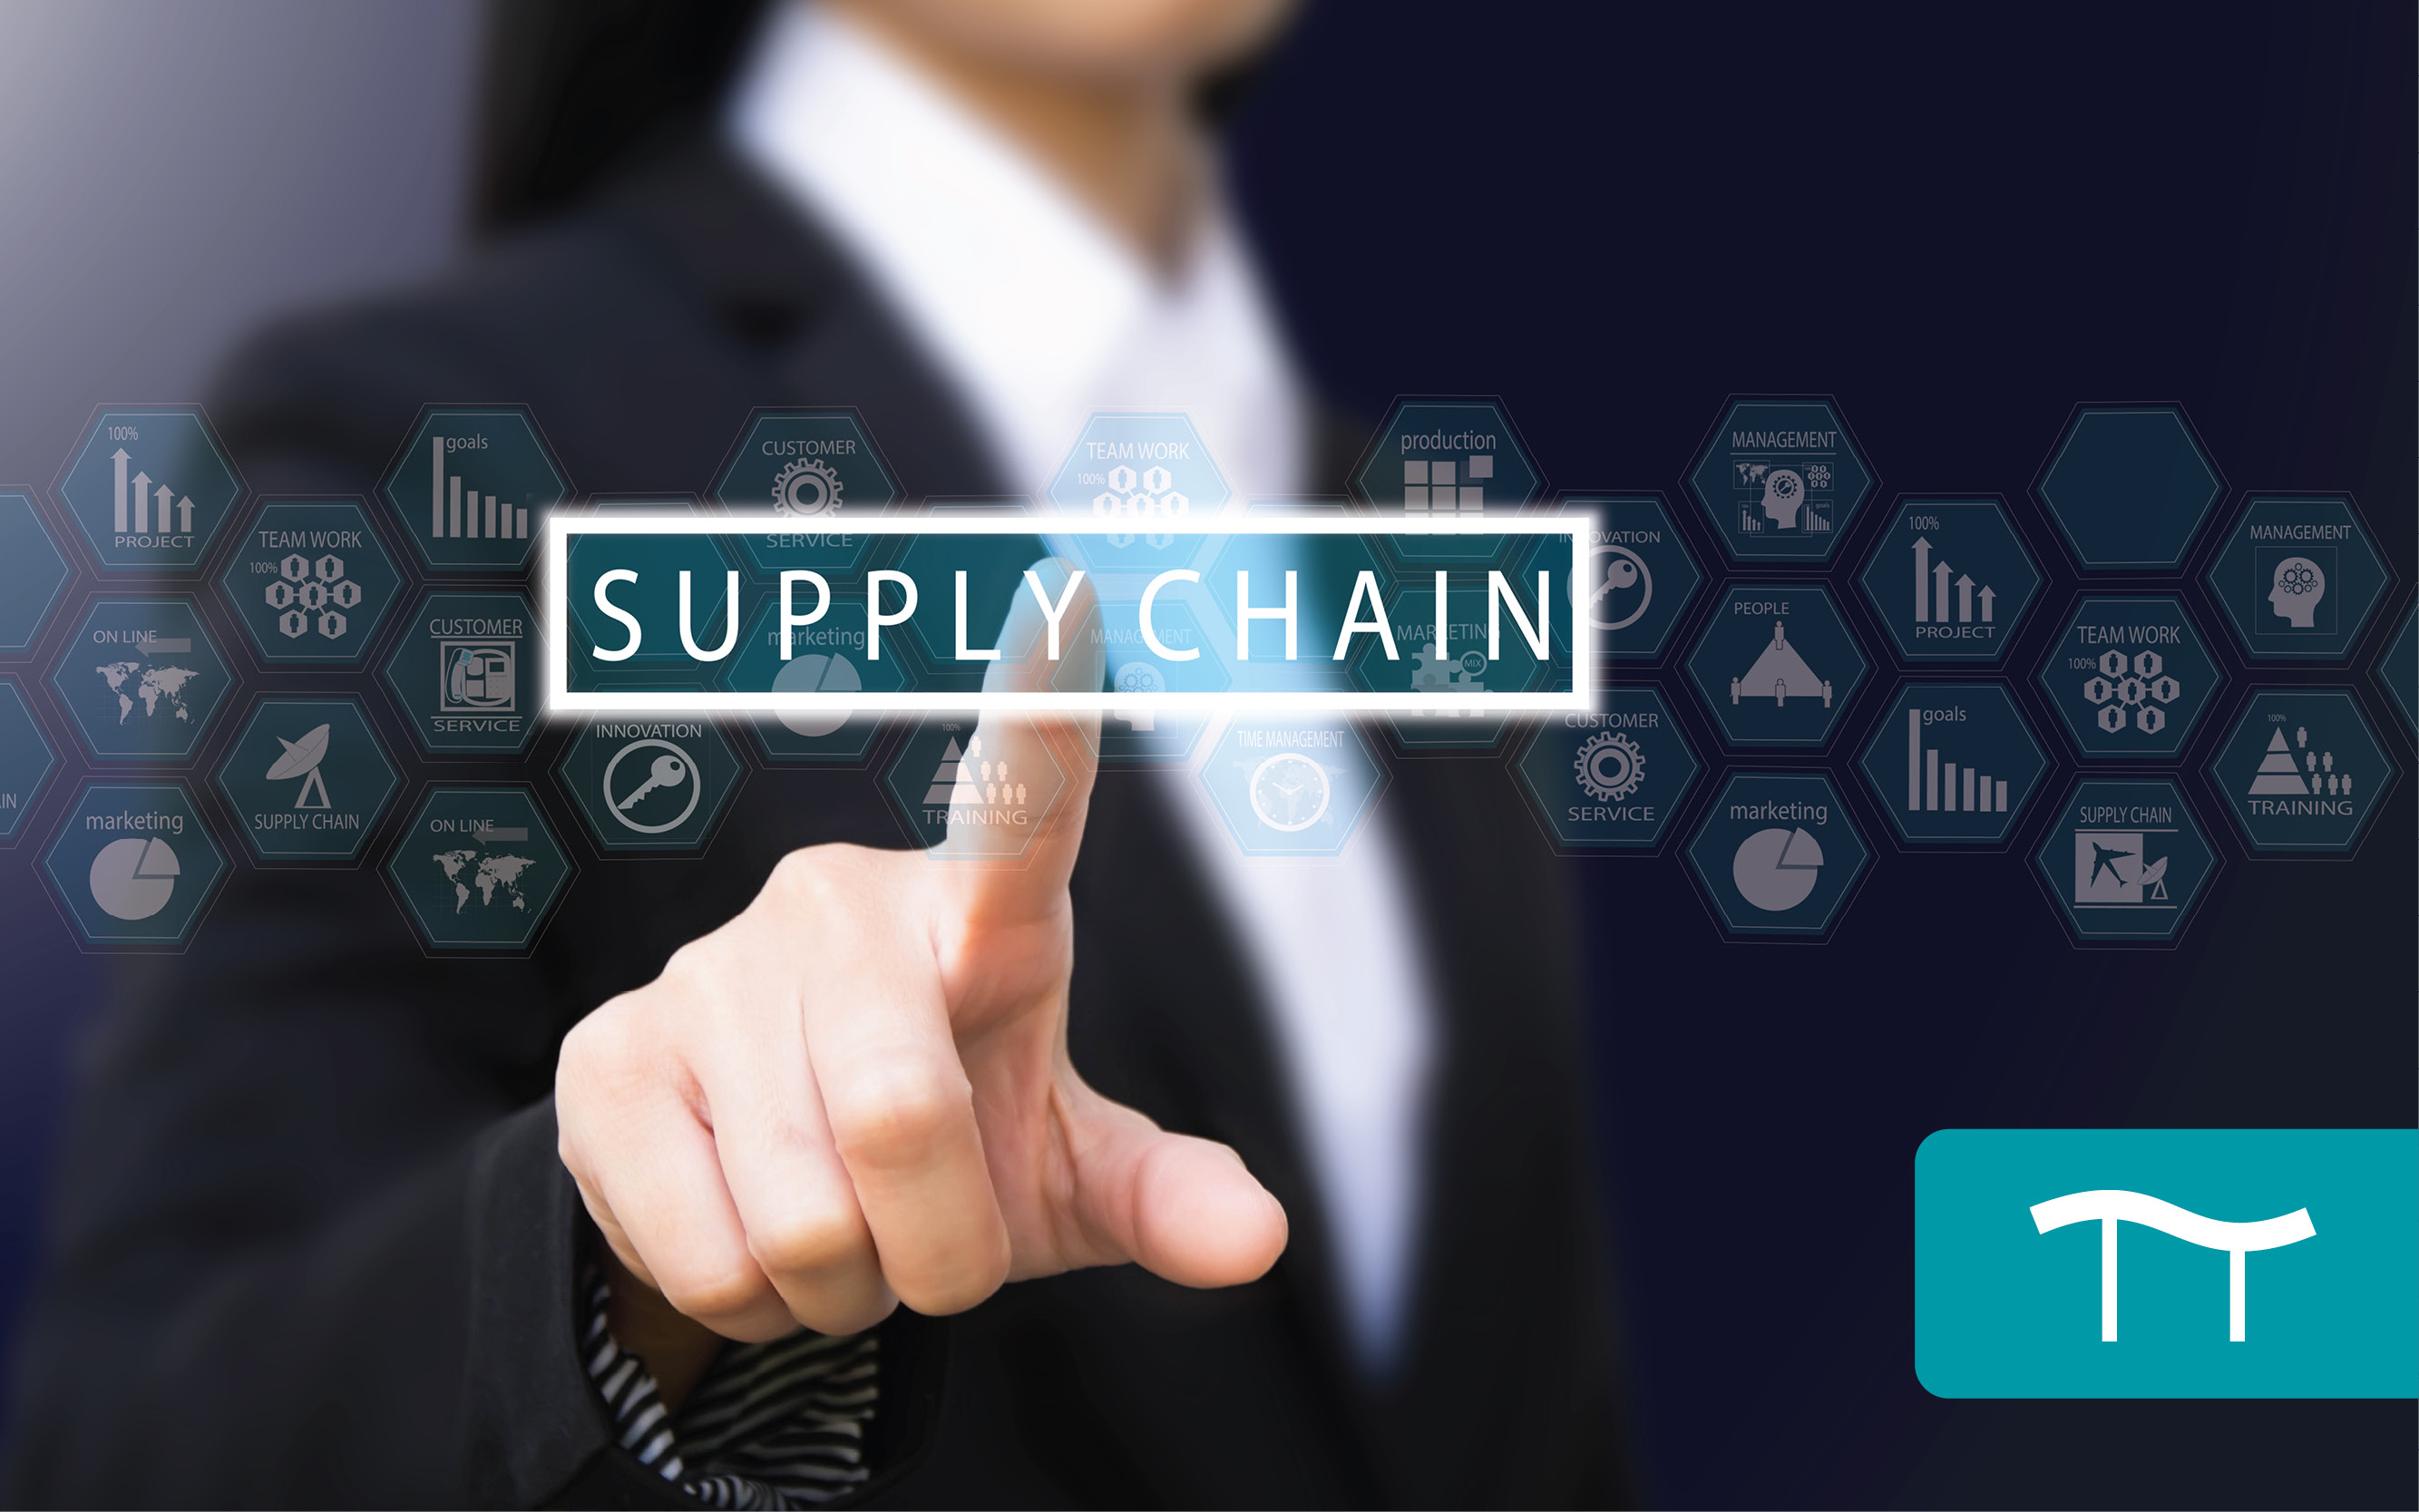 What is the current state of the global supply chain?